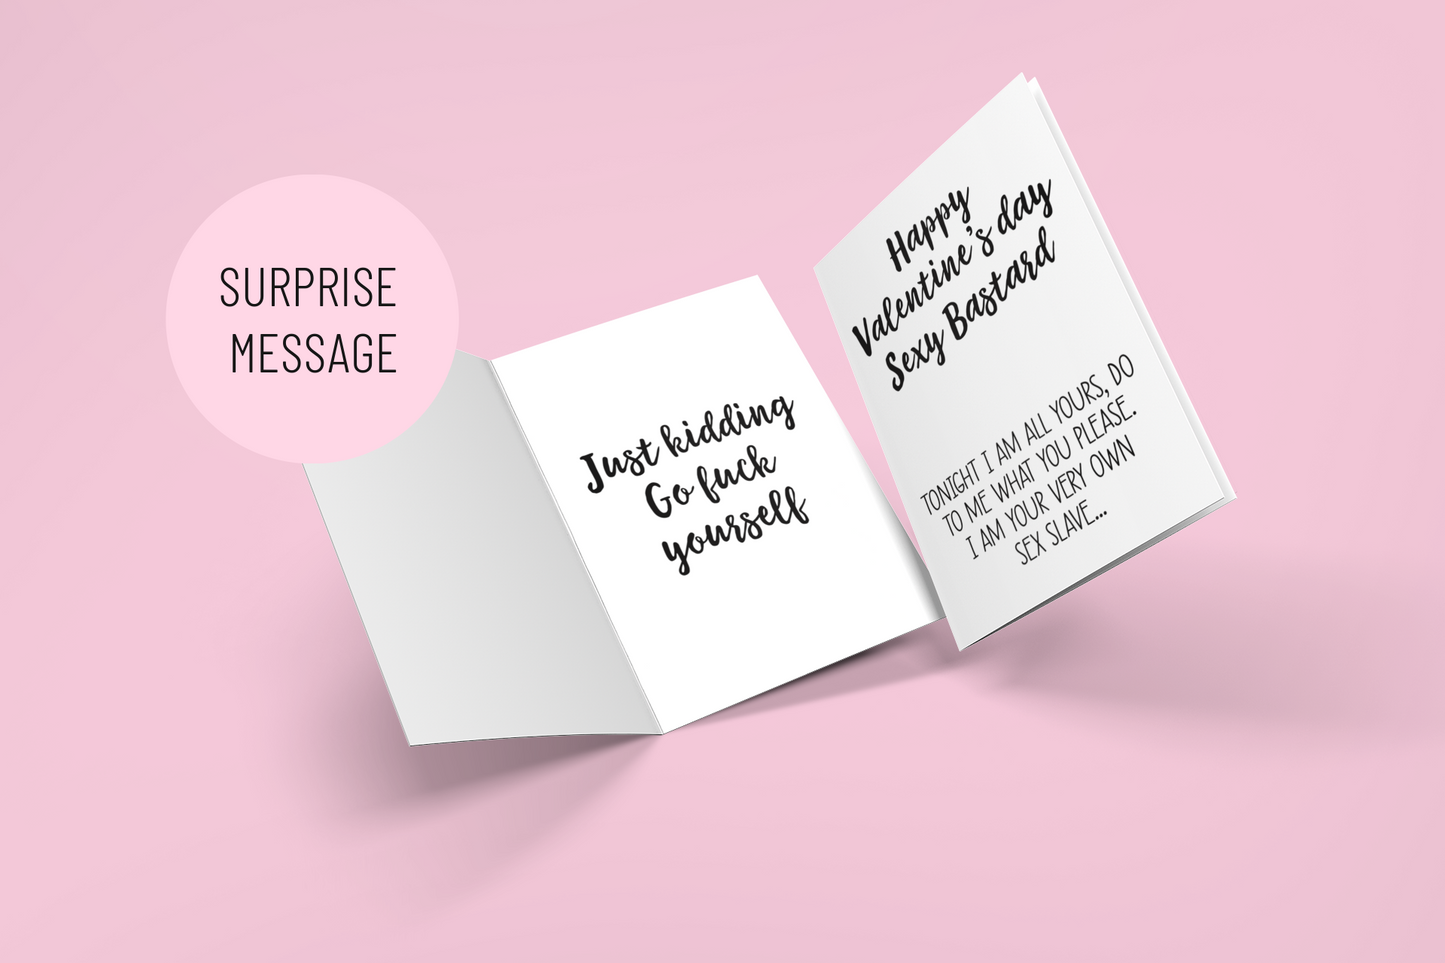 Girls hand holding a white vertical greetings card featuring a fun quote to the front 'happy Valentine's Day you sexy bastard' & a sex slave quote underneath. Printed in black ink.